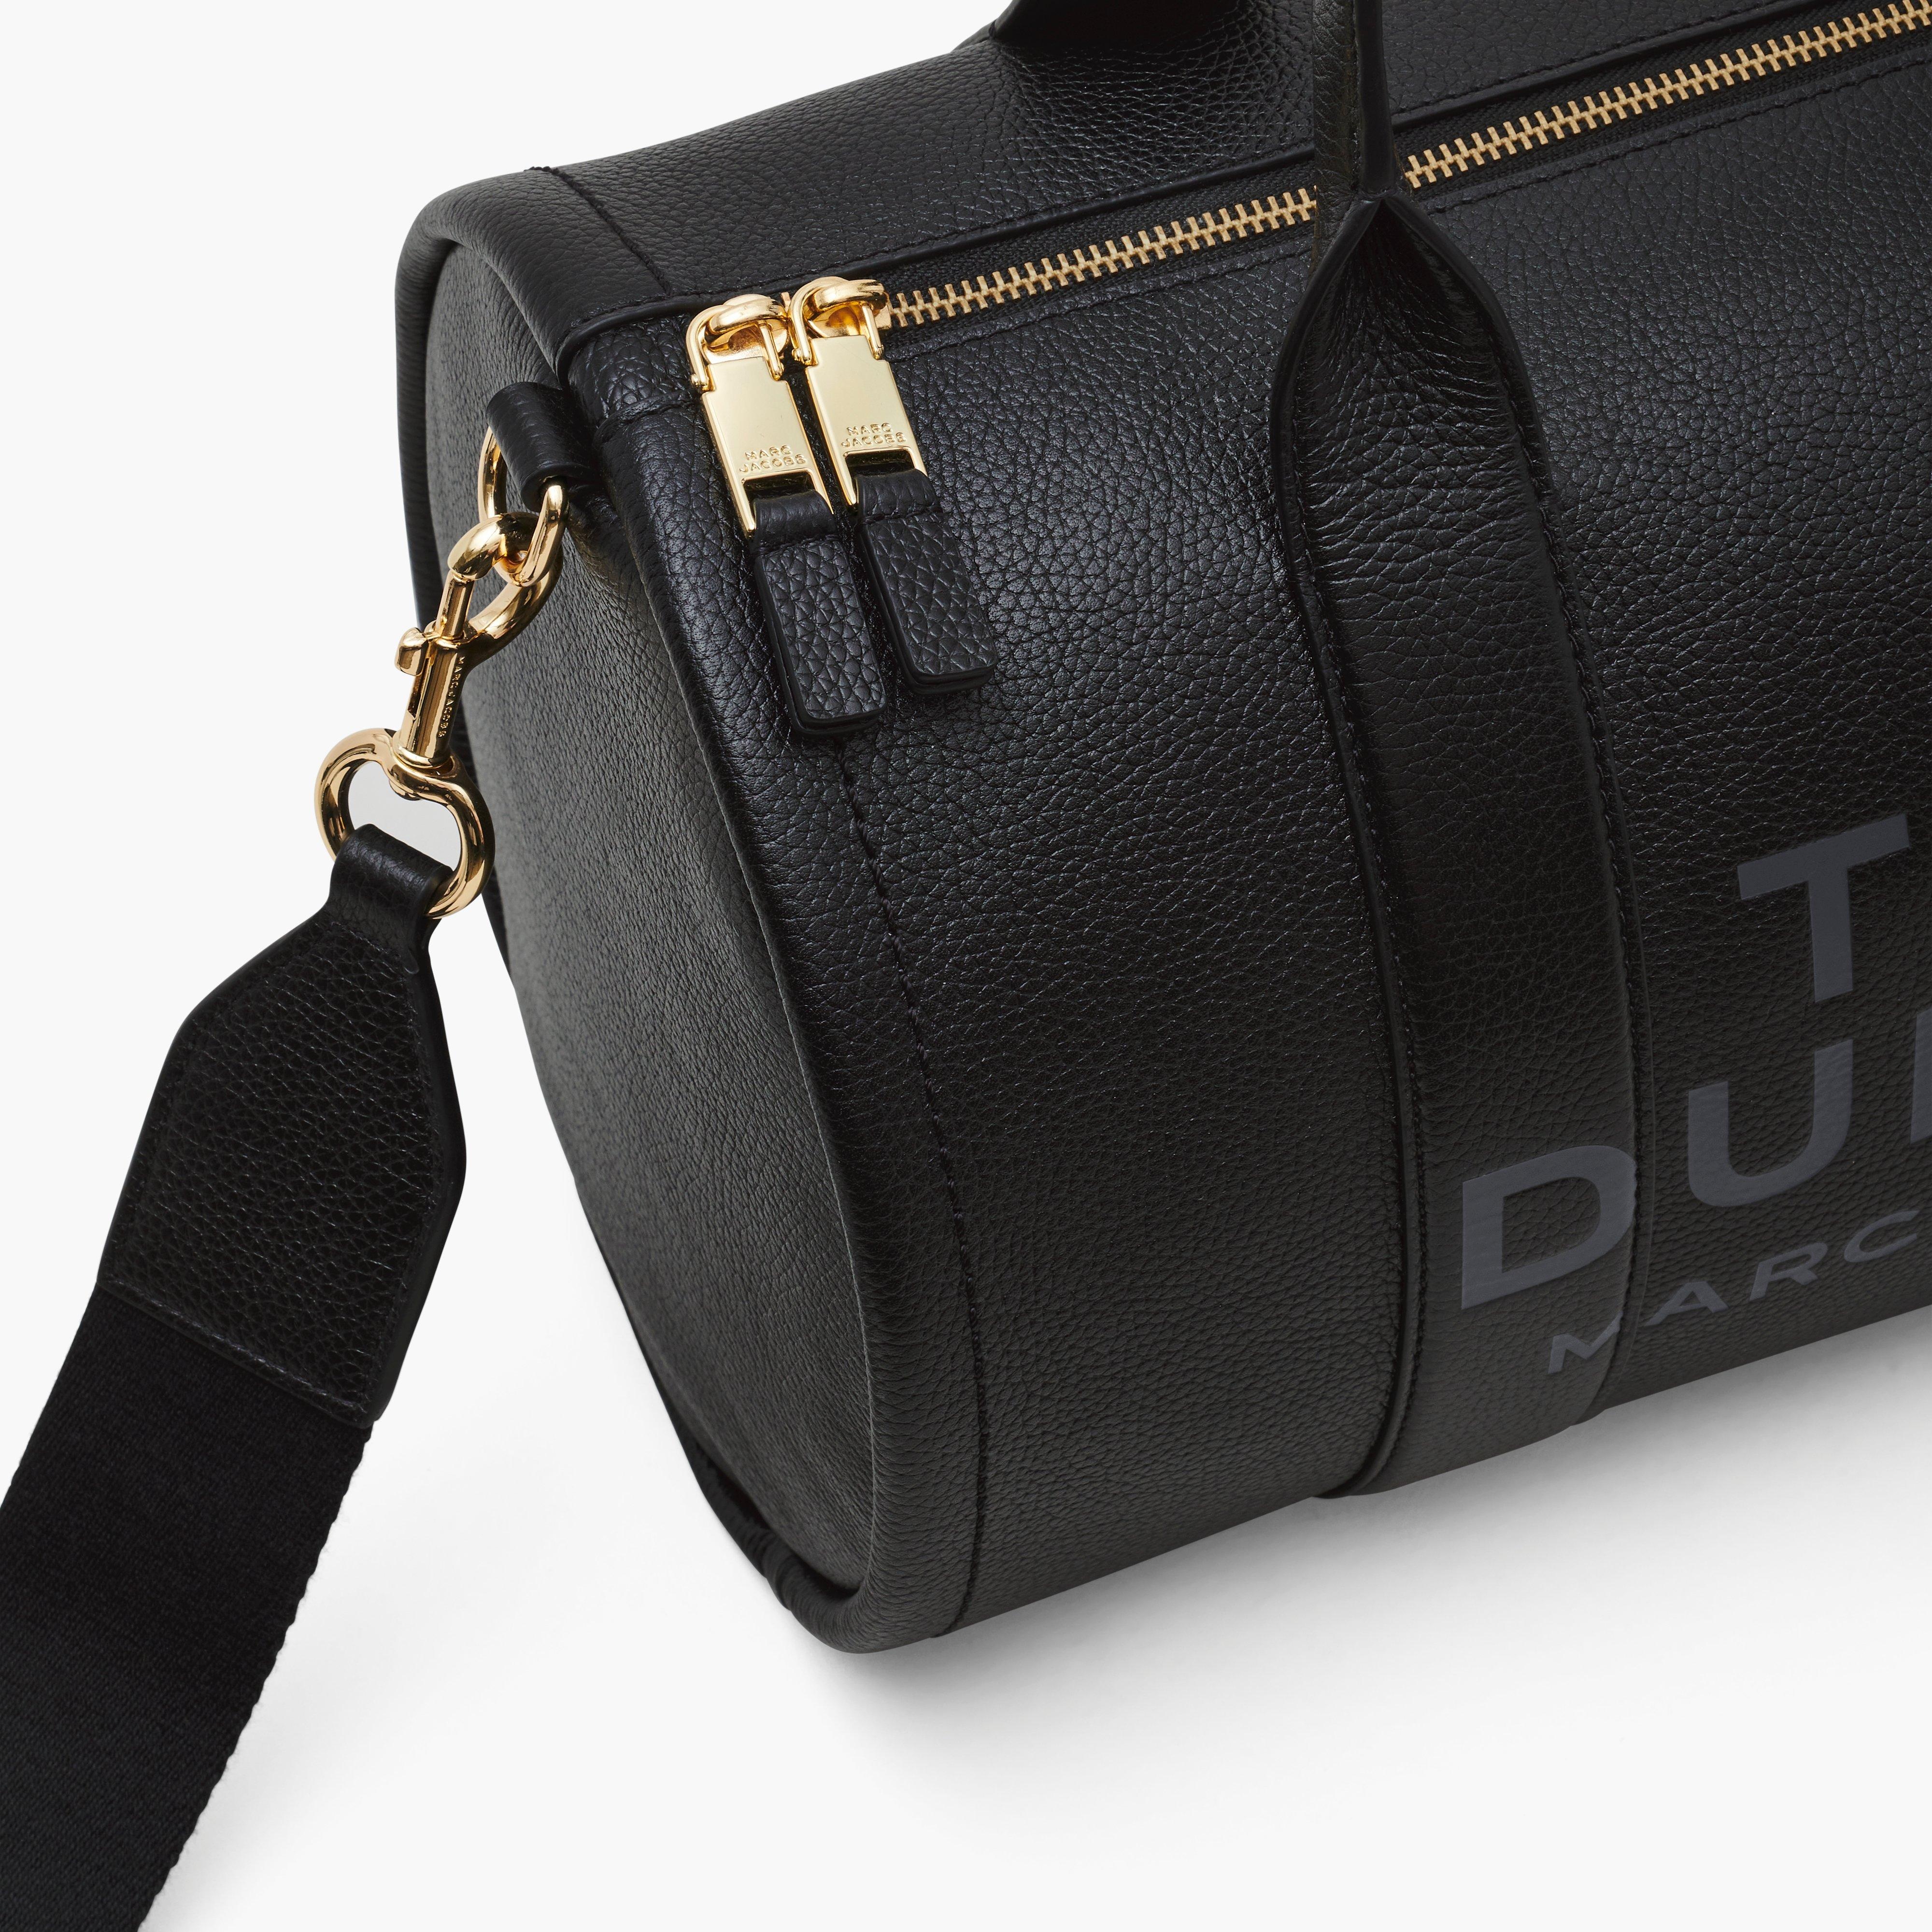 THE LEATHER LARGE DUFFLE BAG - 7